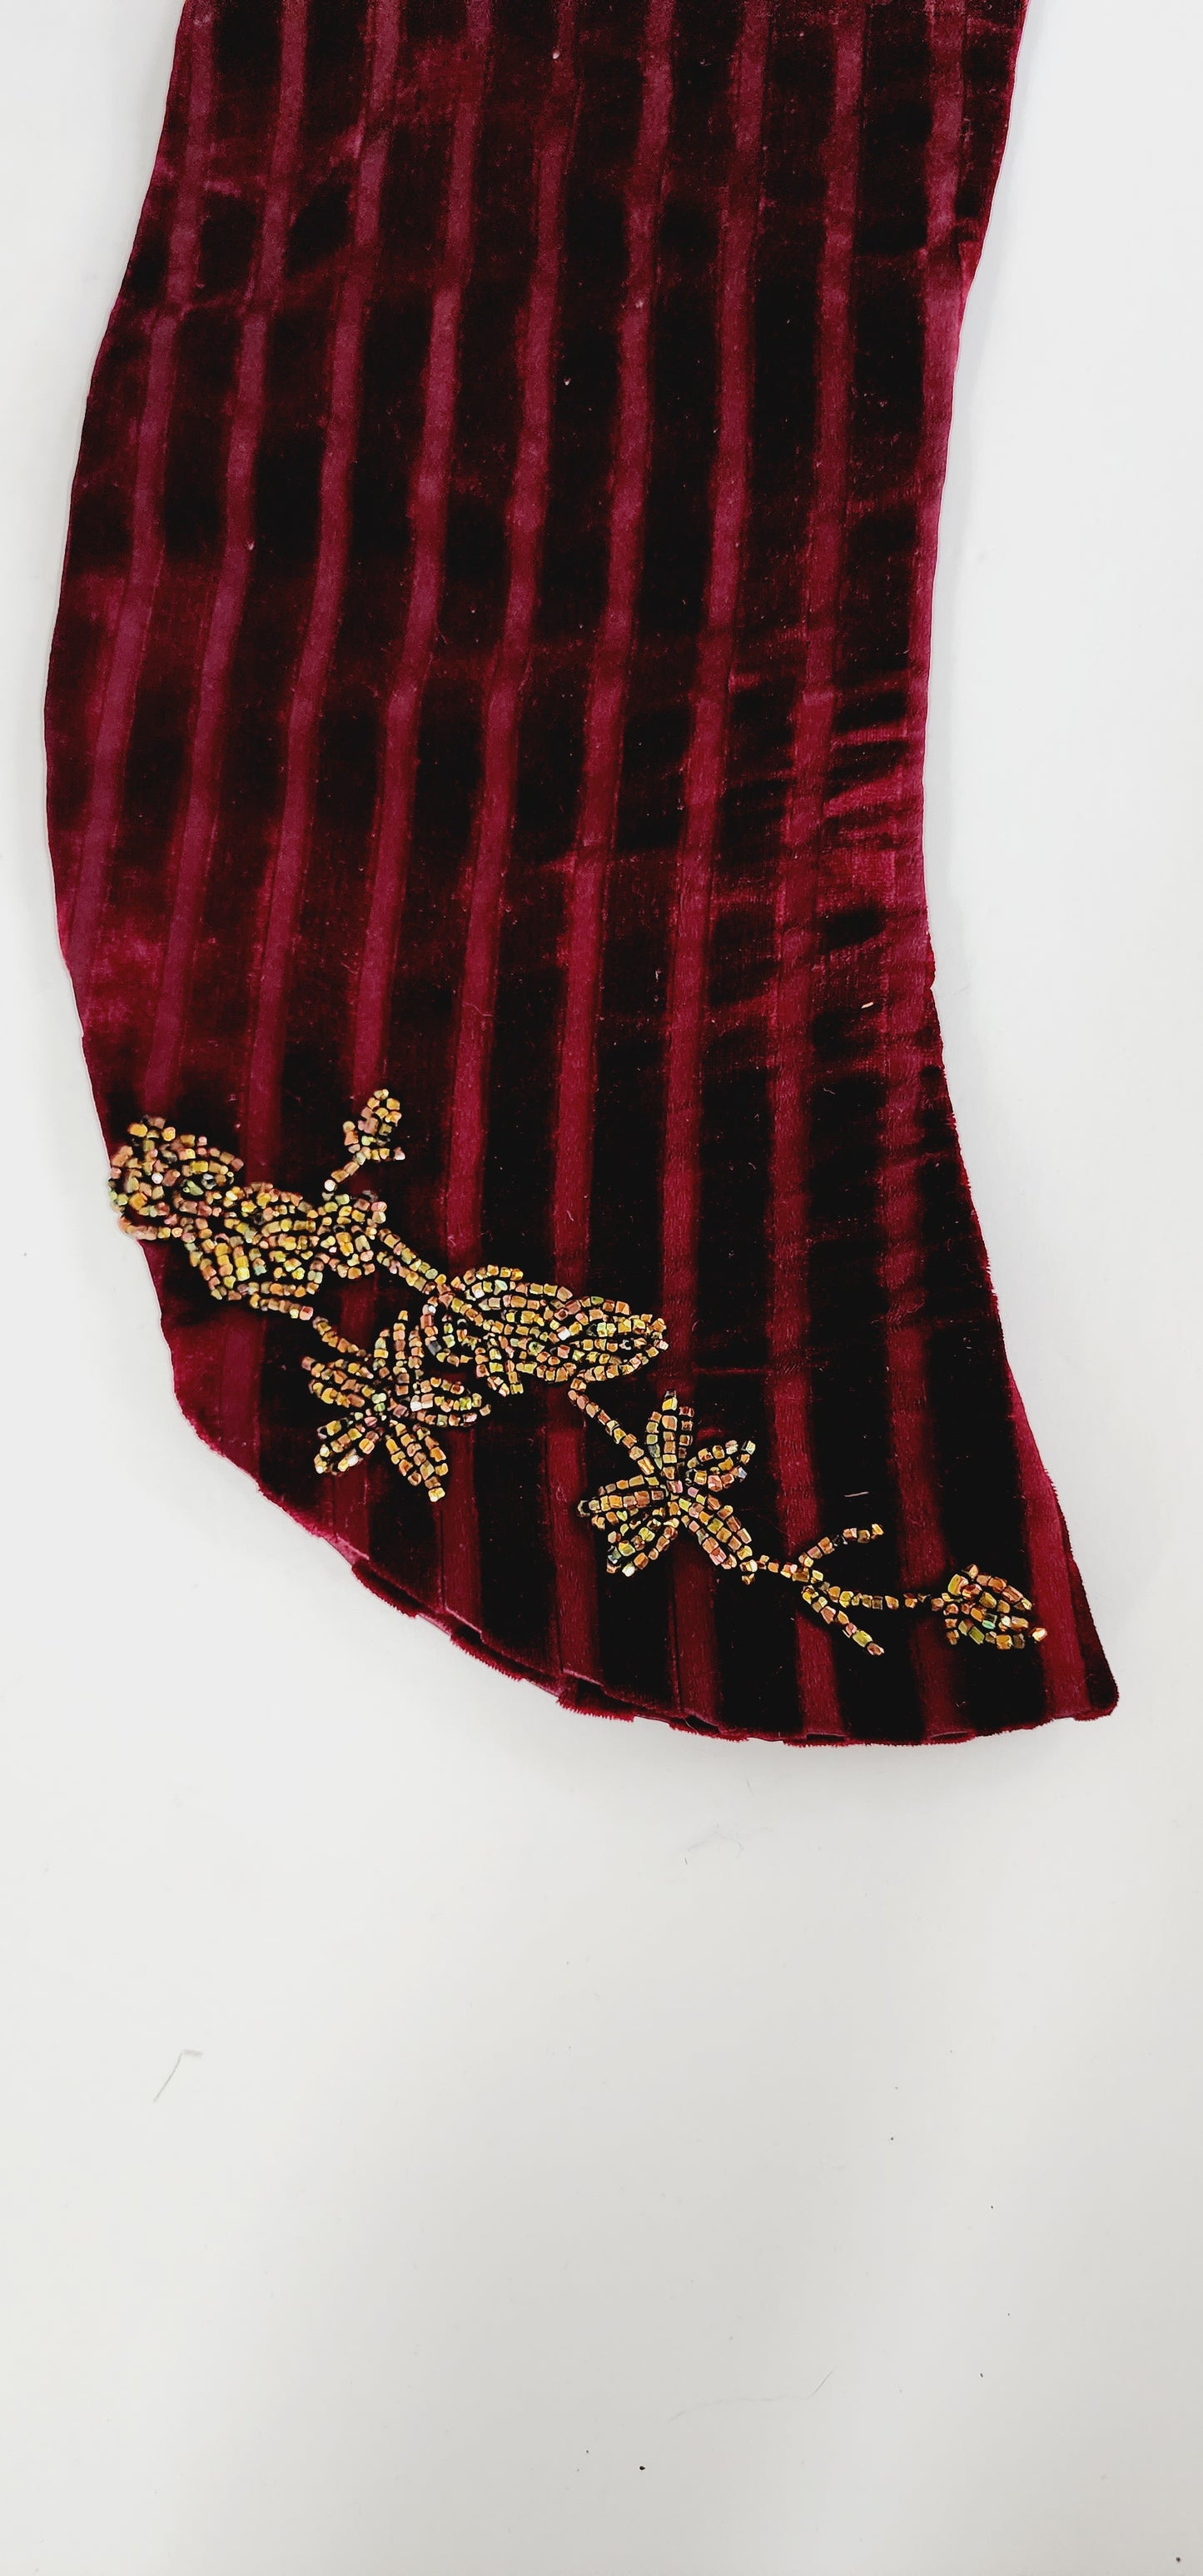 Edwardian Costume Sleeve in Red Velvet Gold Bead Embroidery